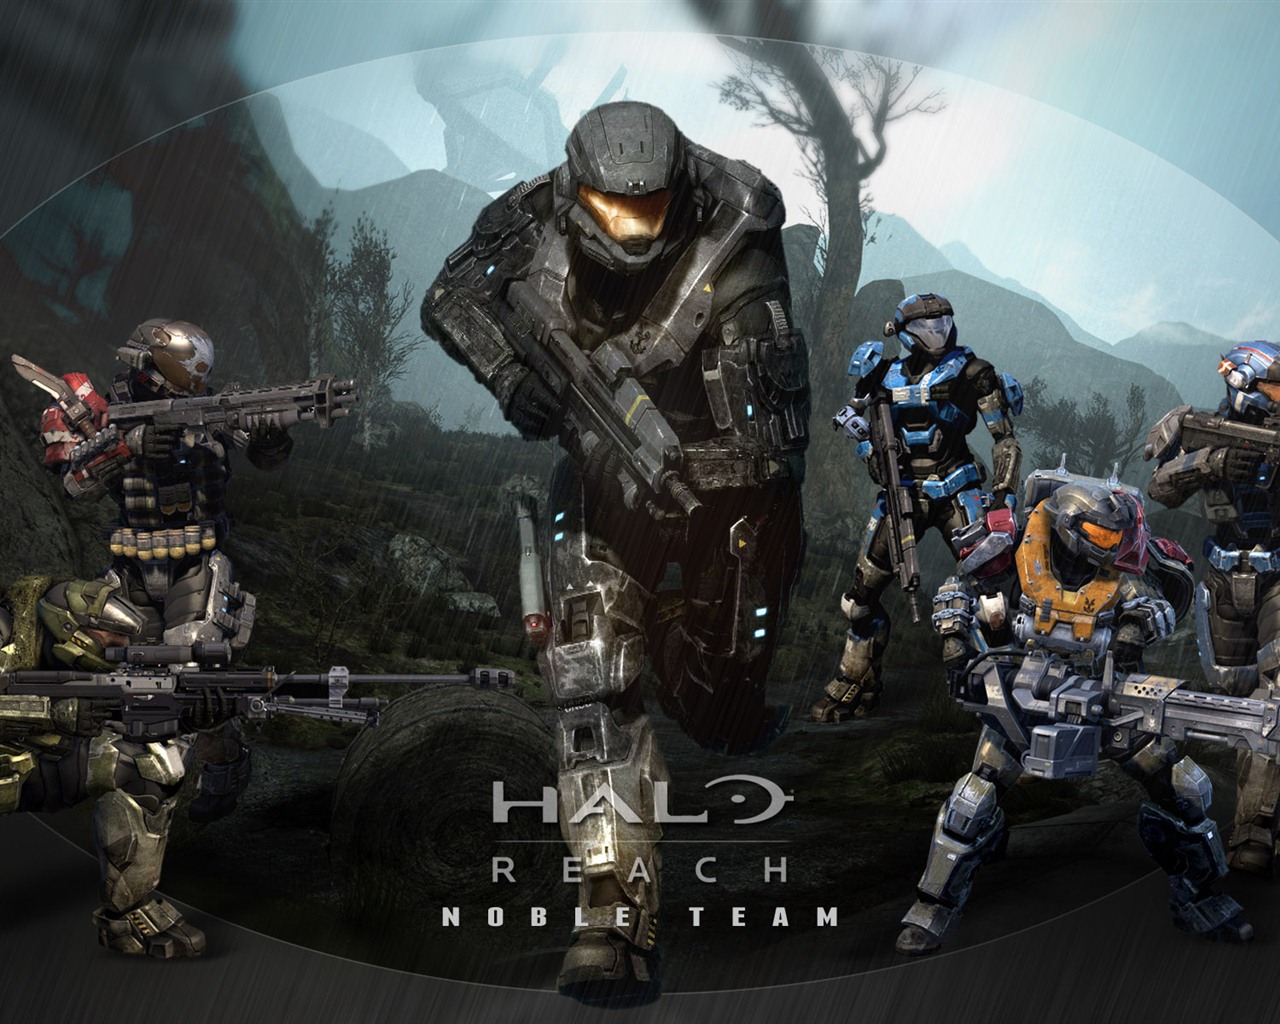 Halo game HD wallpapers #23 - 1280x1024